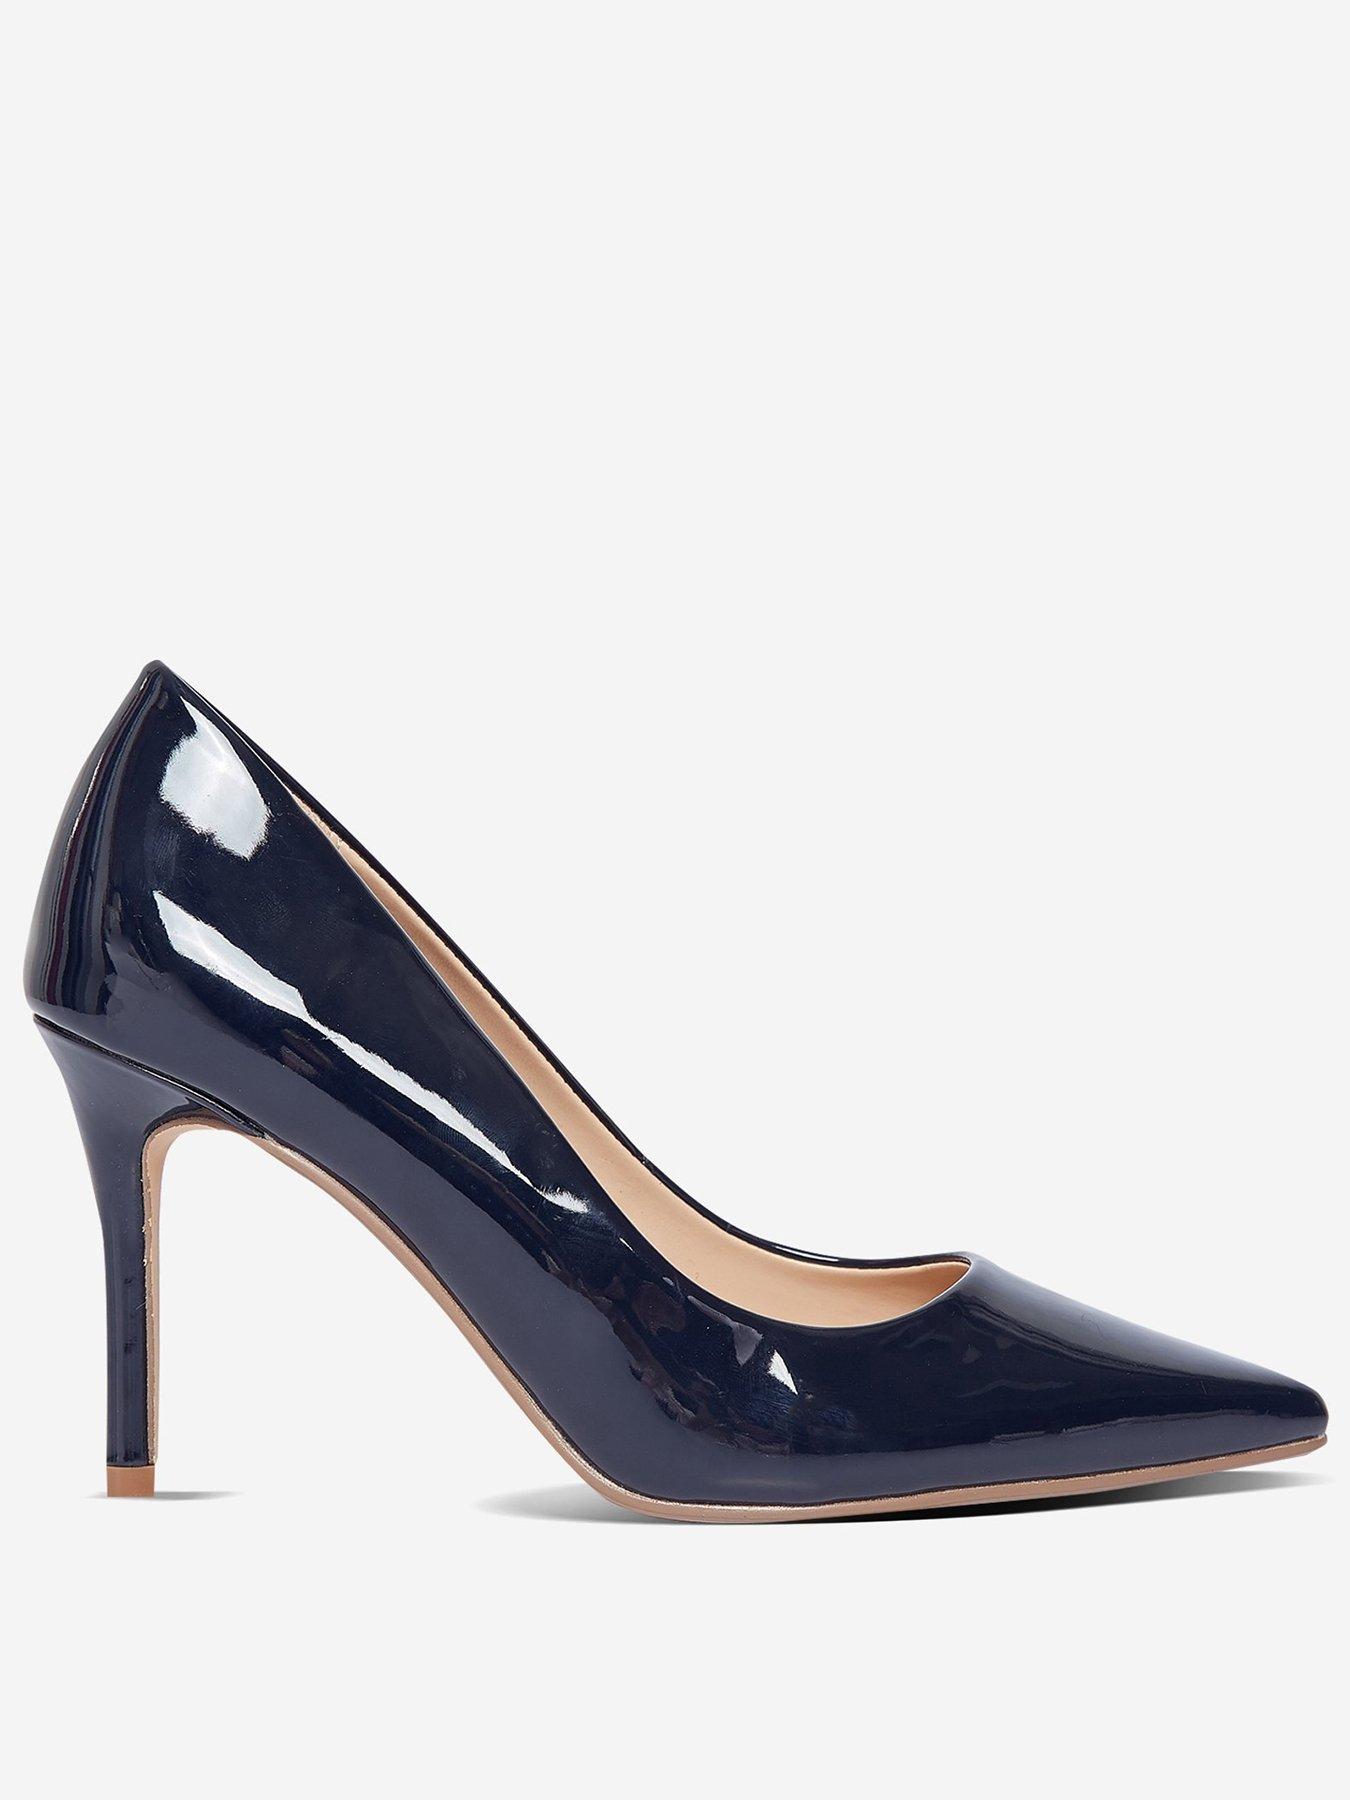 dorothy perkins court shoes